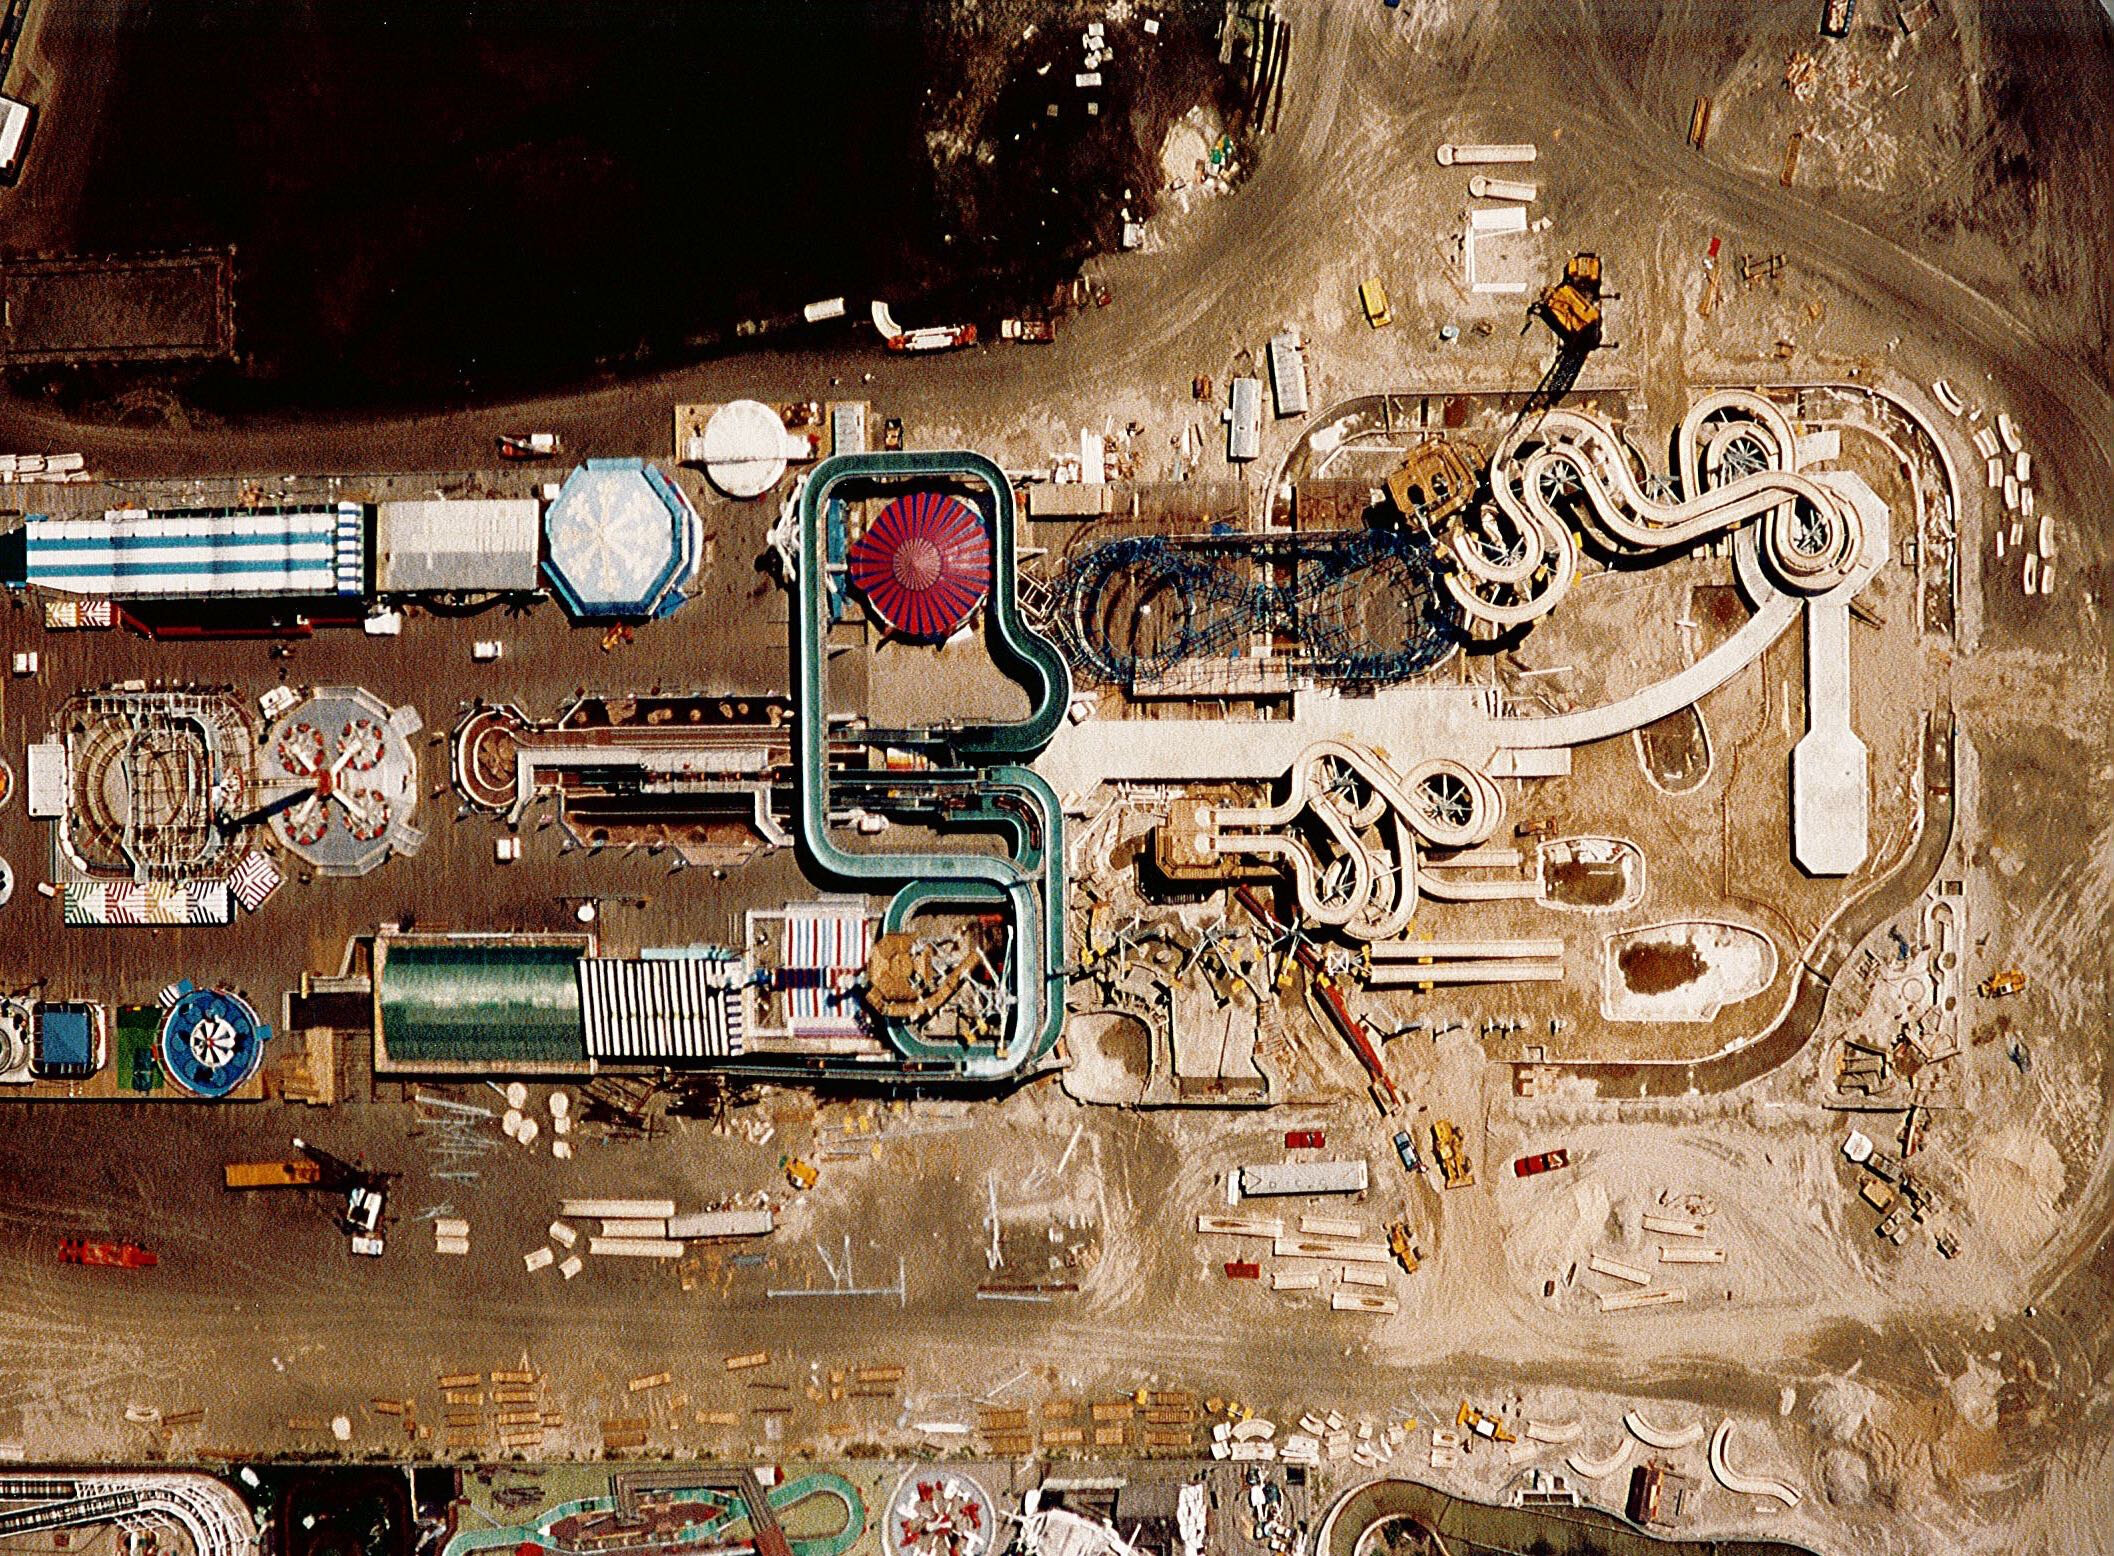 An aerial photo of the construction of the second Raging Waters water park on Morey’s Surfside Pier in 1988 – the facility was relaunched as Ocean Oasis water park in 2006.